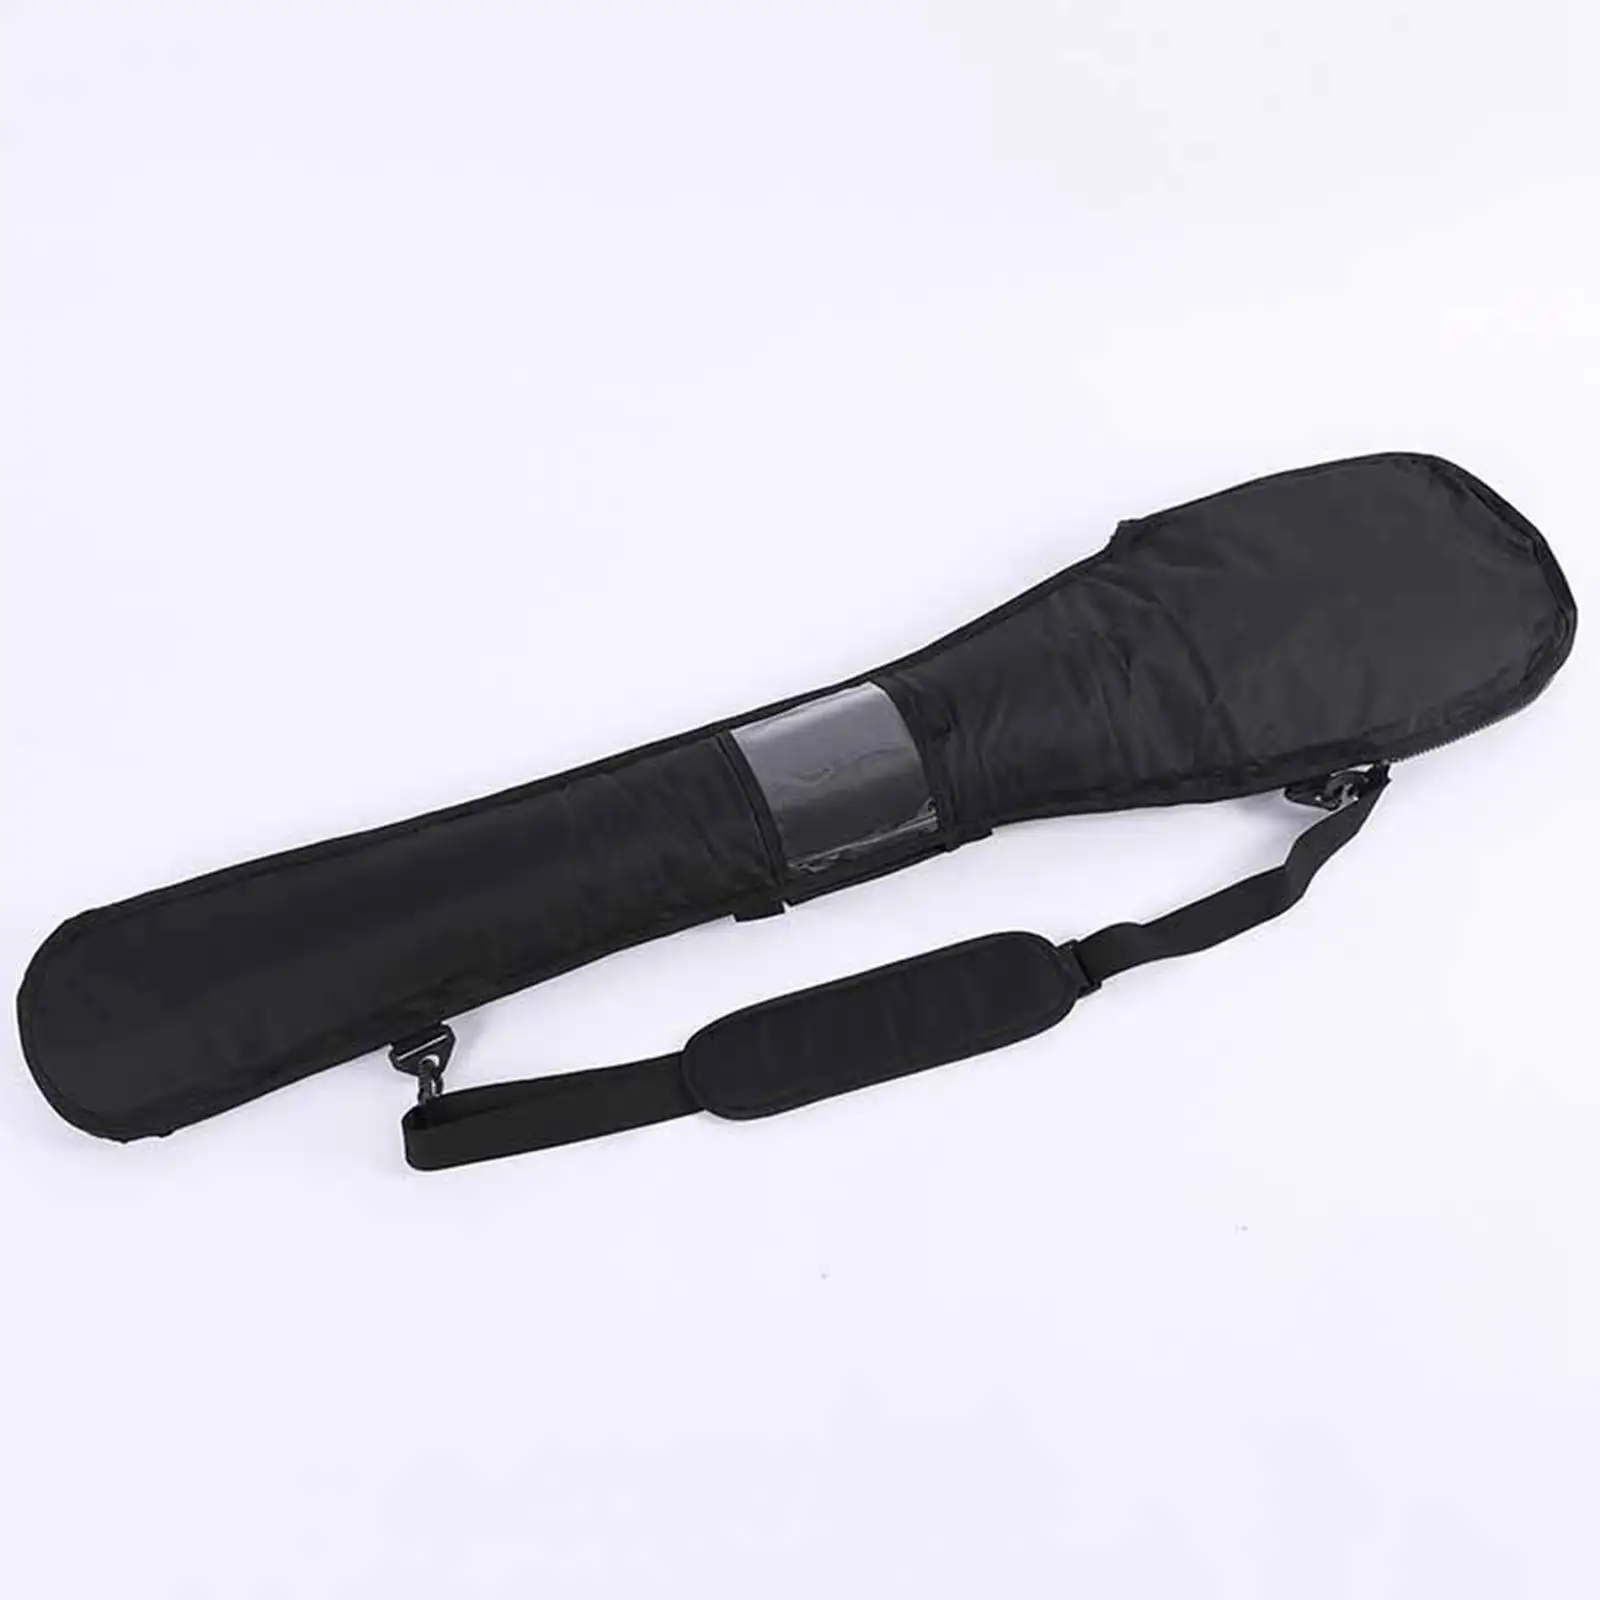 Paddle Pouch Accessory Pocket Protective with Adjustable Strap Cover for  Board